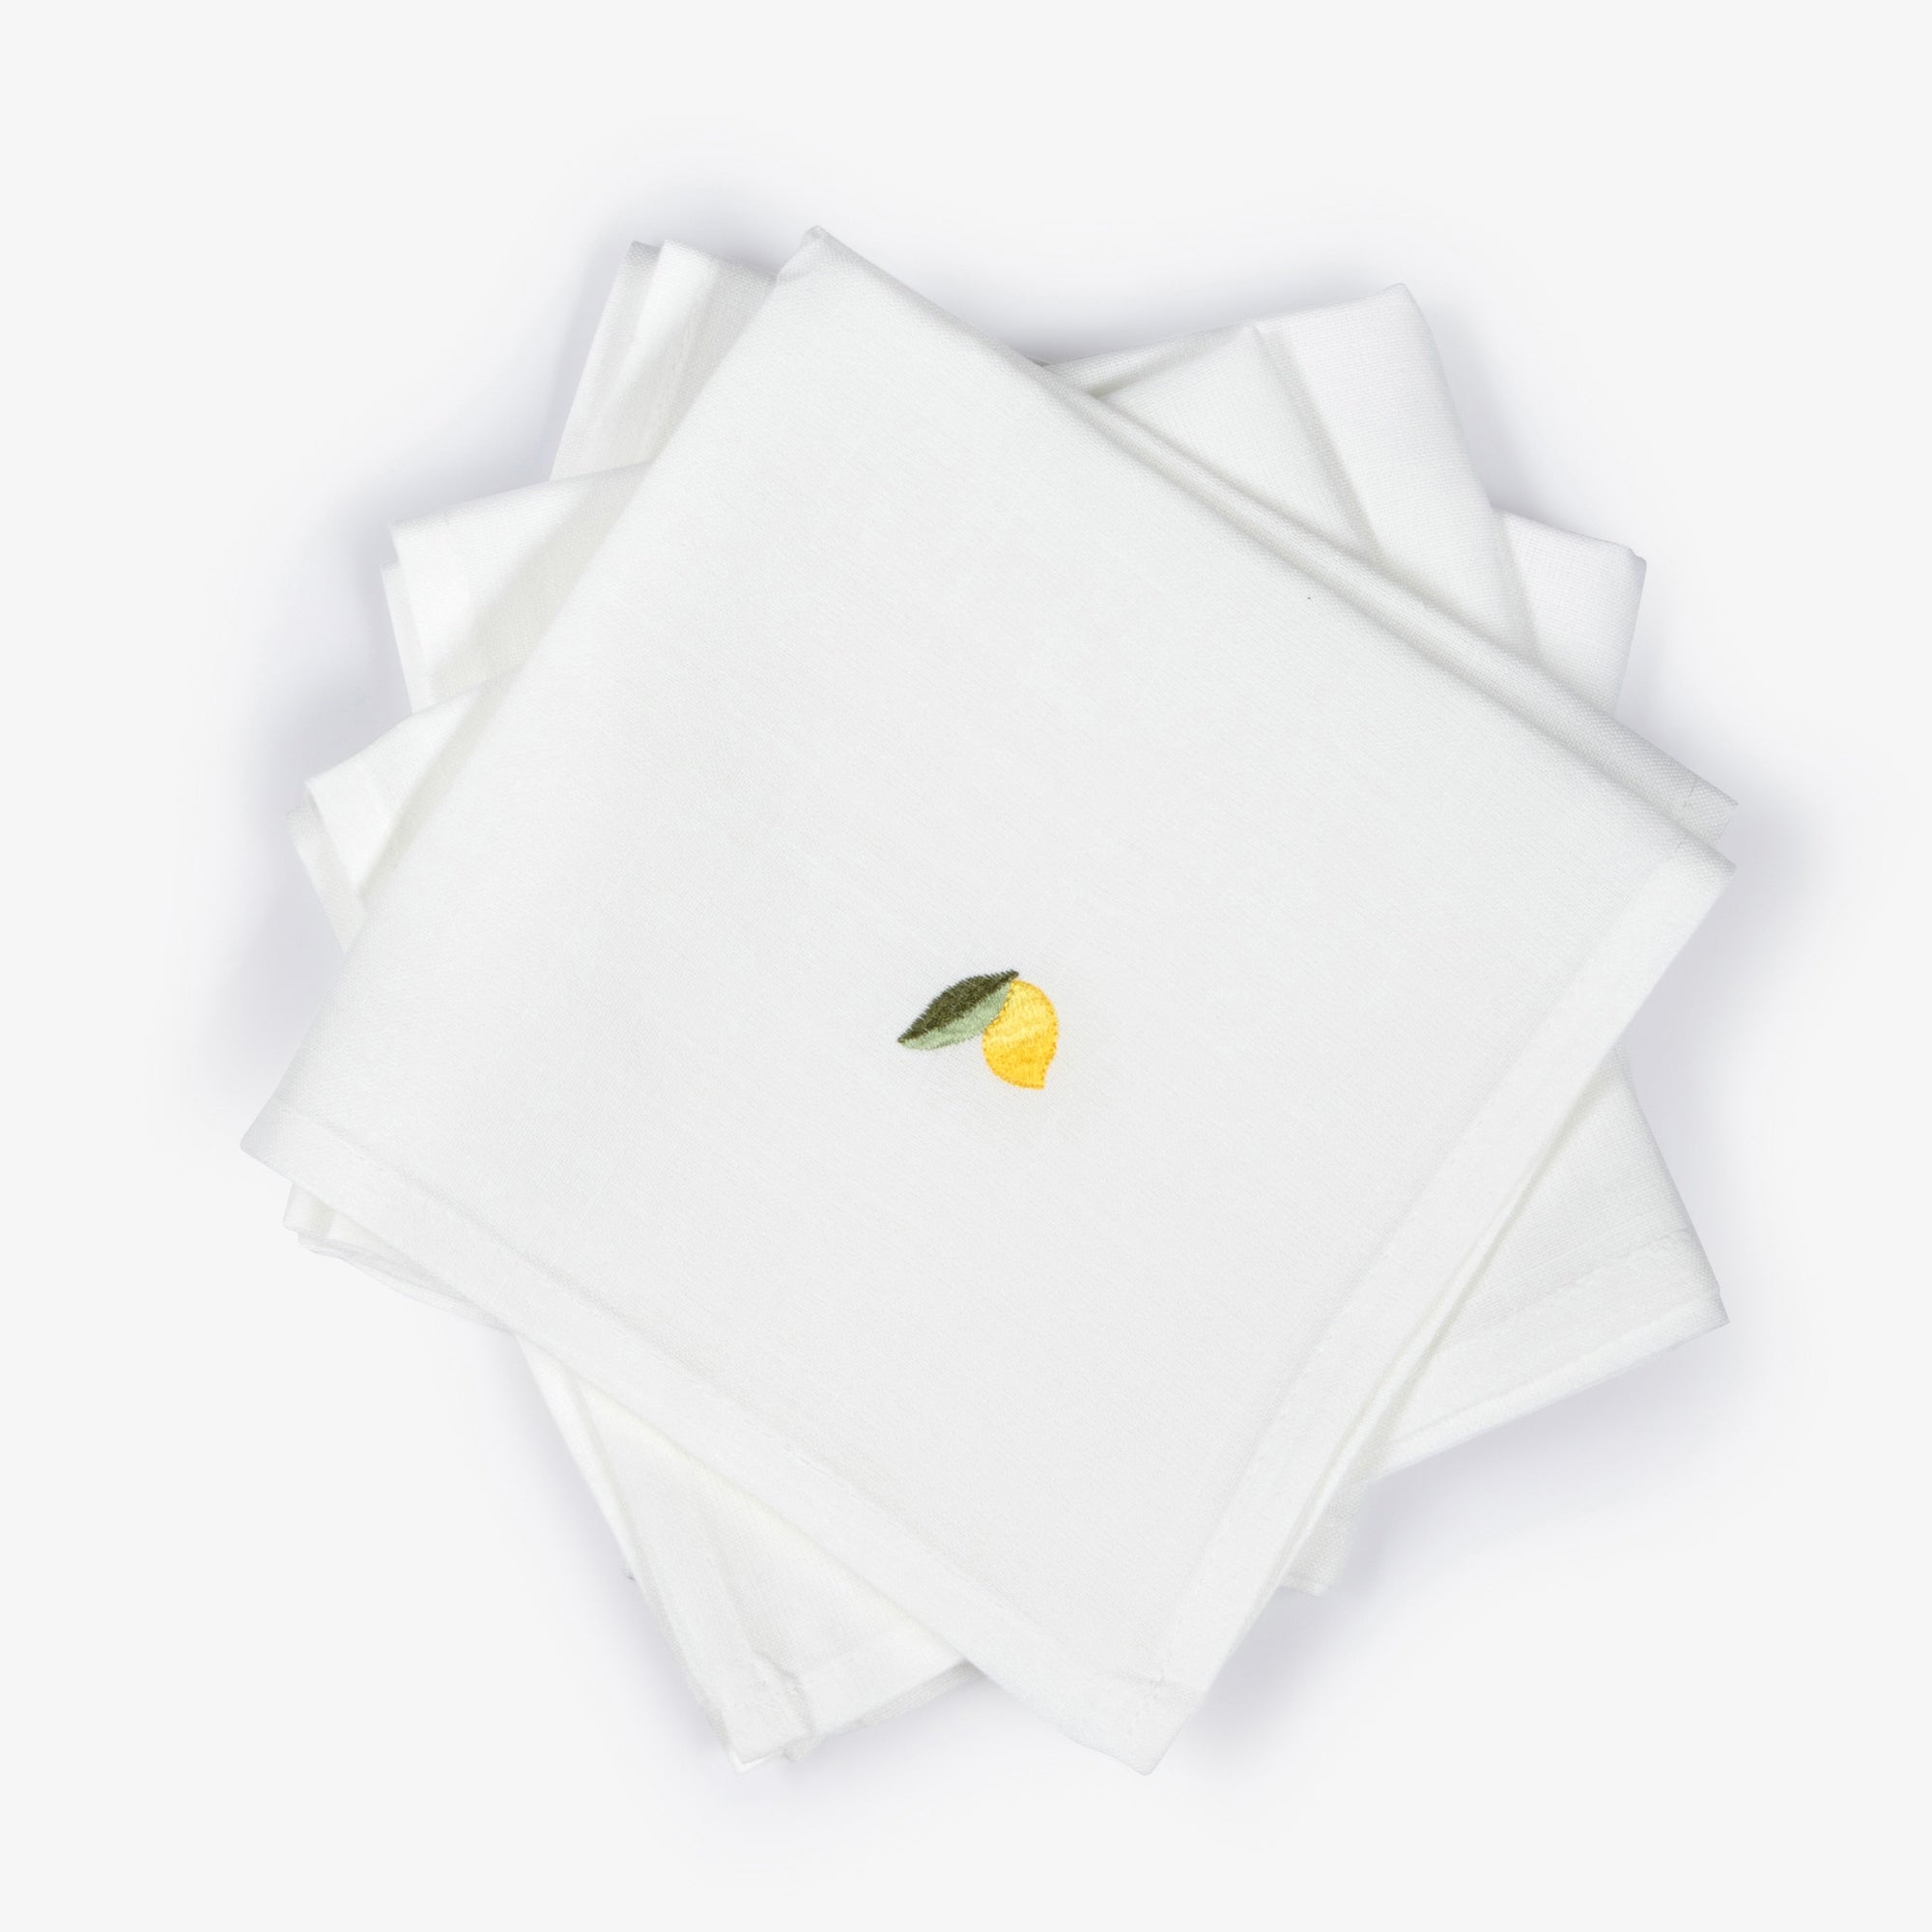 Lemon Cotton and Linen Blend Napkins, Set of Four - The Finishing Store South Africa